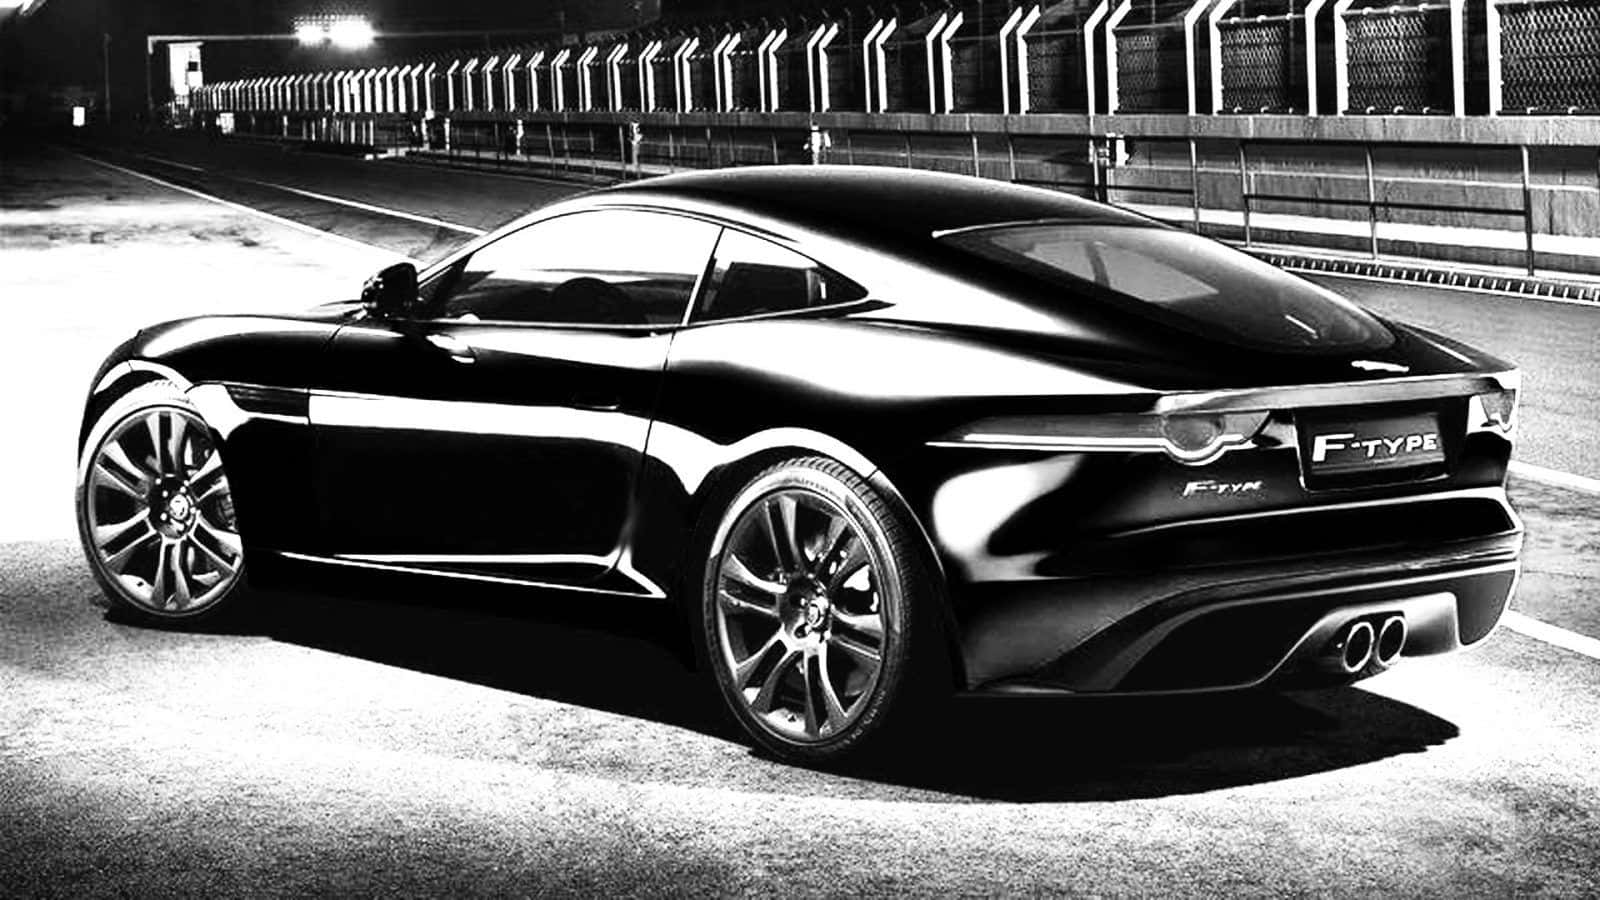 Black and White Sports Car Wallpaper